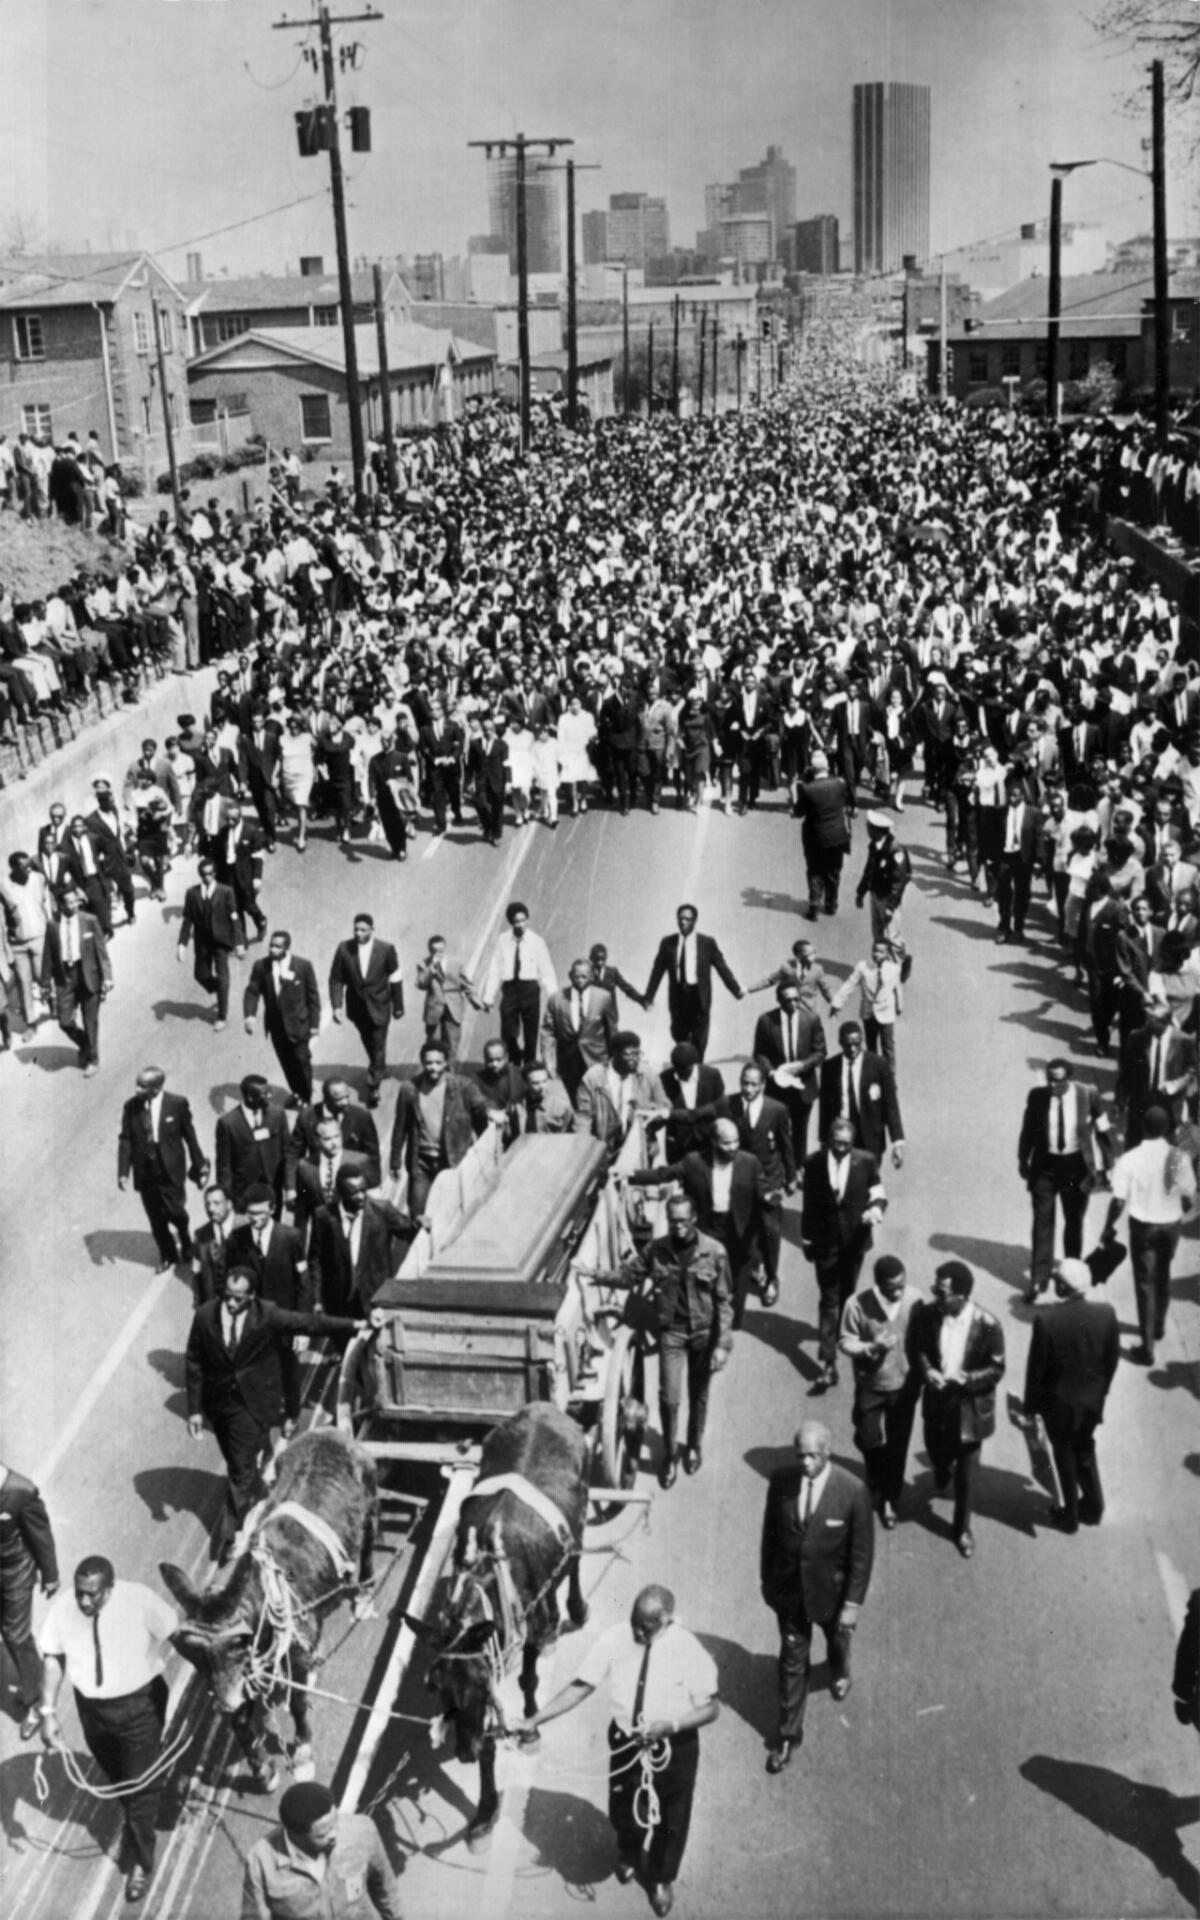 Dr. Martin Luther King met death at the hands of an assassin in 1968. His funeral procession through the streets of Atlanta drew this huge crowd of mourners.